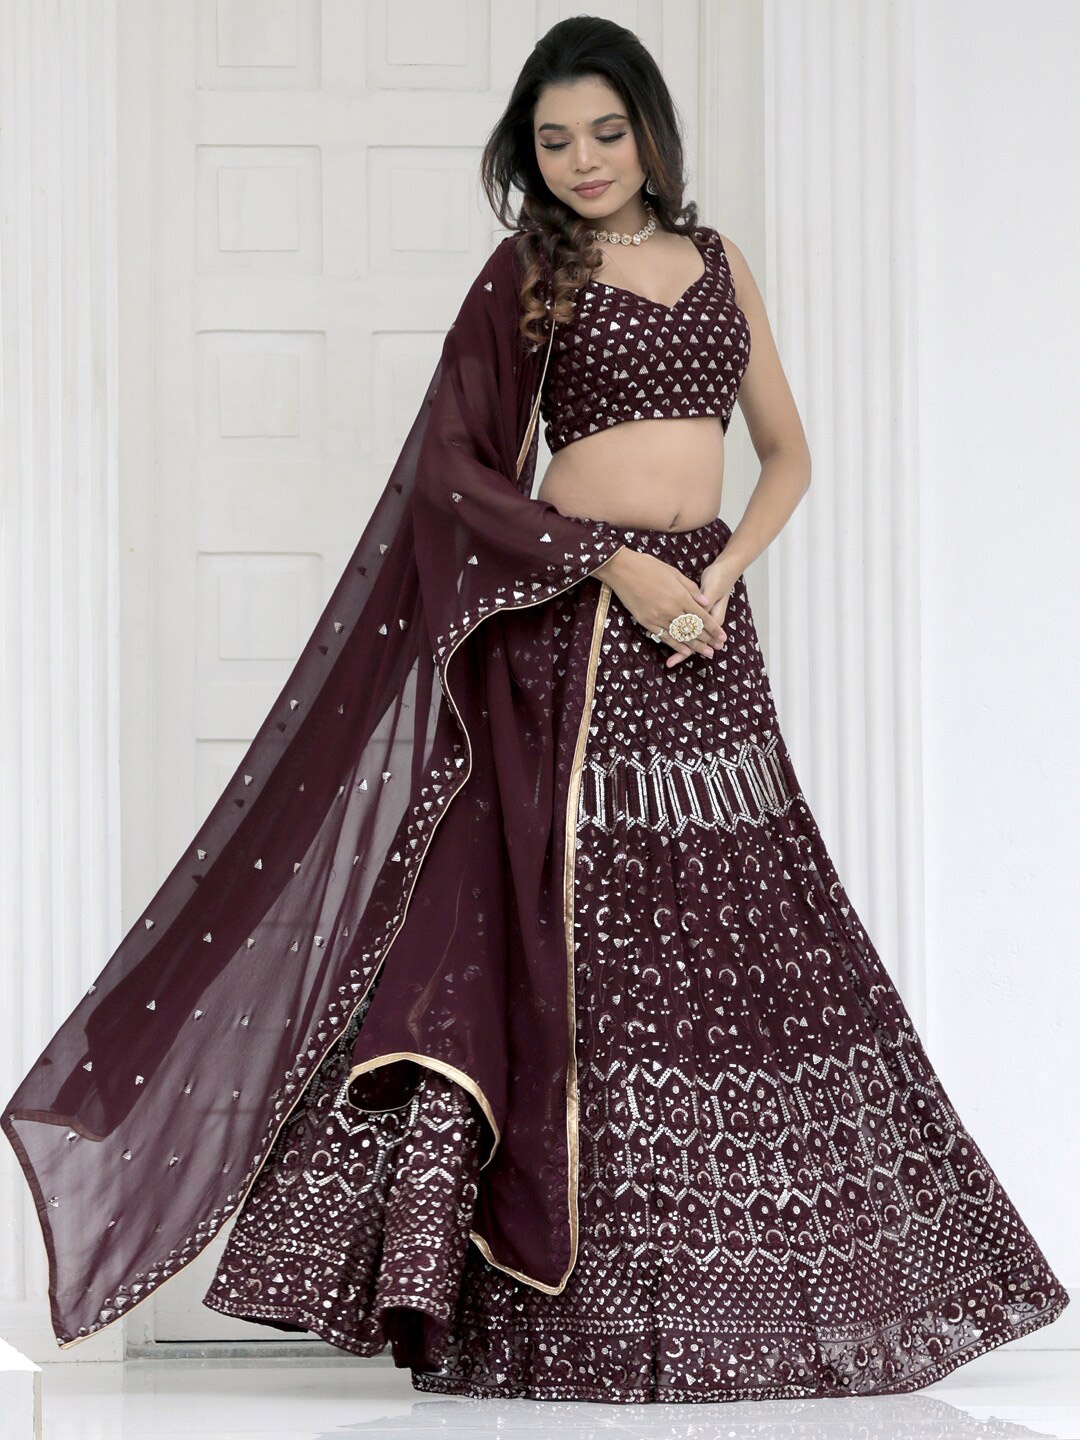 

TIKODI Embroidered Sequinned Semi-Stitched Lehenga & Unstitched Blouse With Dupatta, Brown